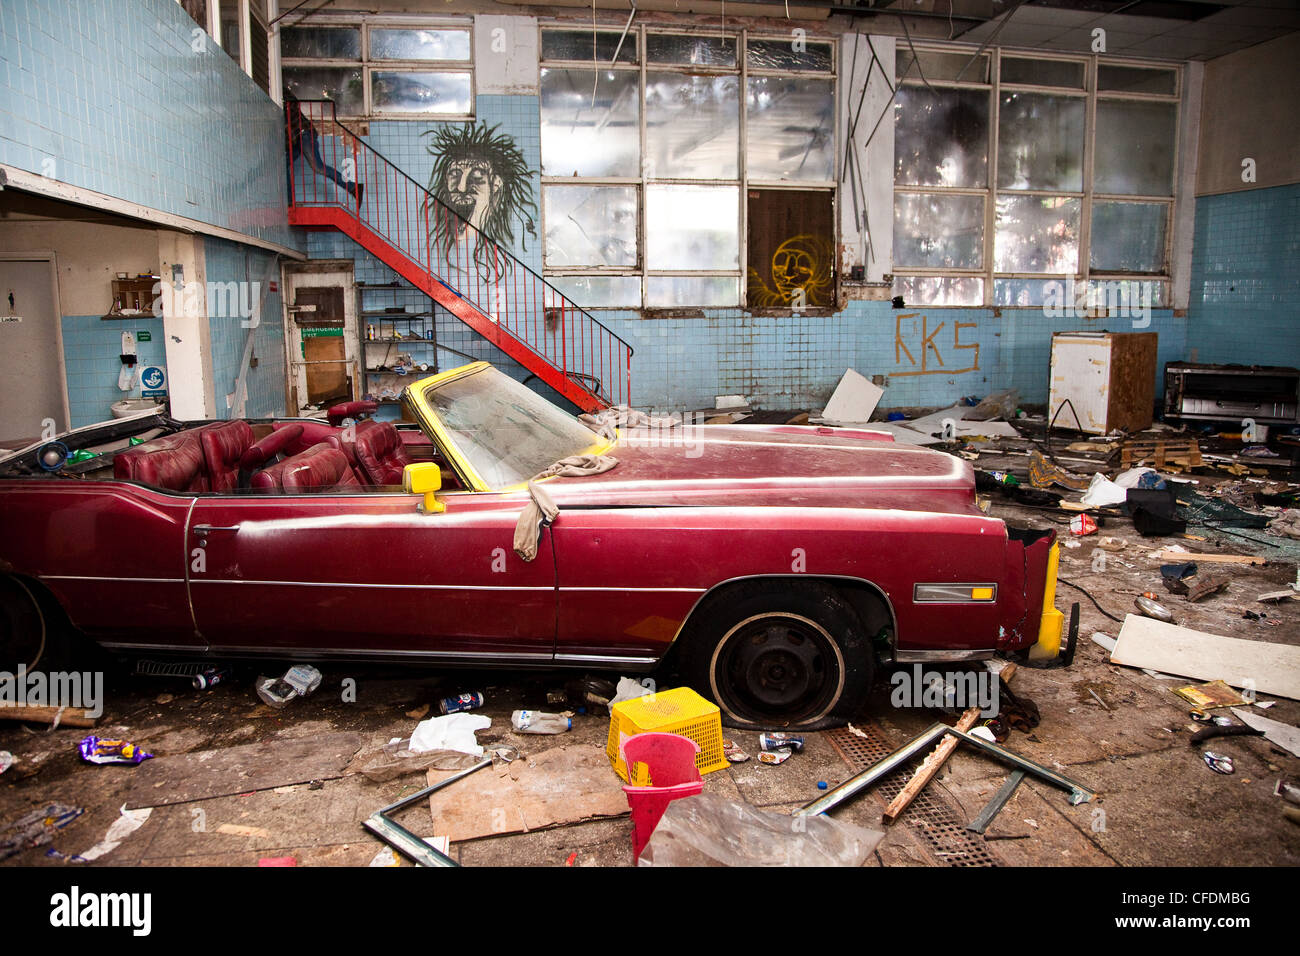 A Cadillac sits vandalized in a derelict warehouse inhabited by vagrants in seven sisters, Tottenham, London. Stock Photo